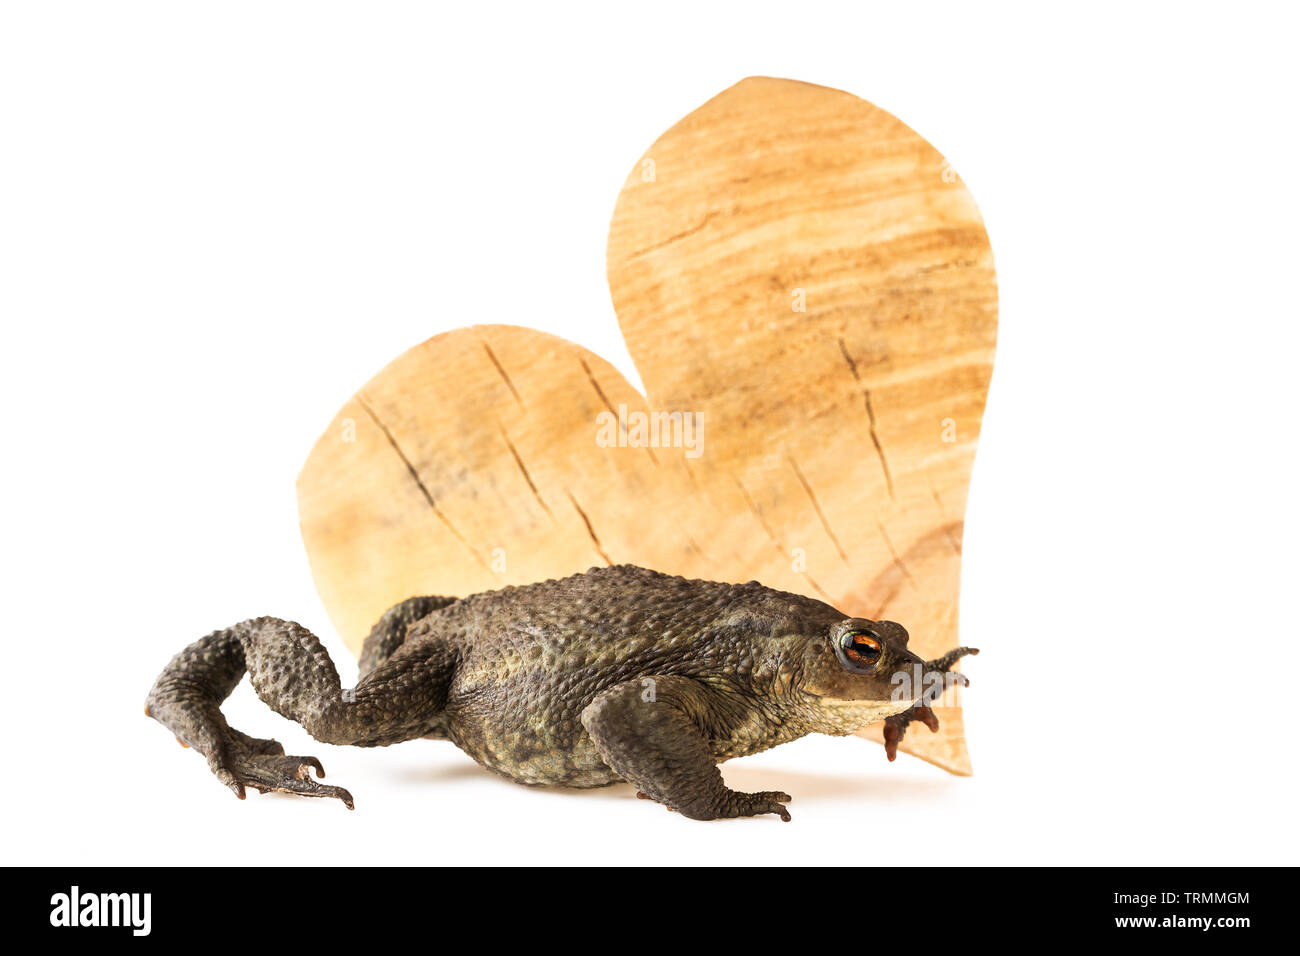 common toad Bufo bufo and wood heart as environment concept Stock Photo